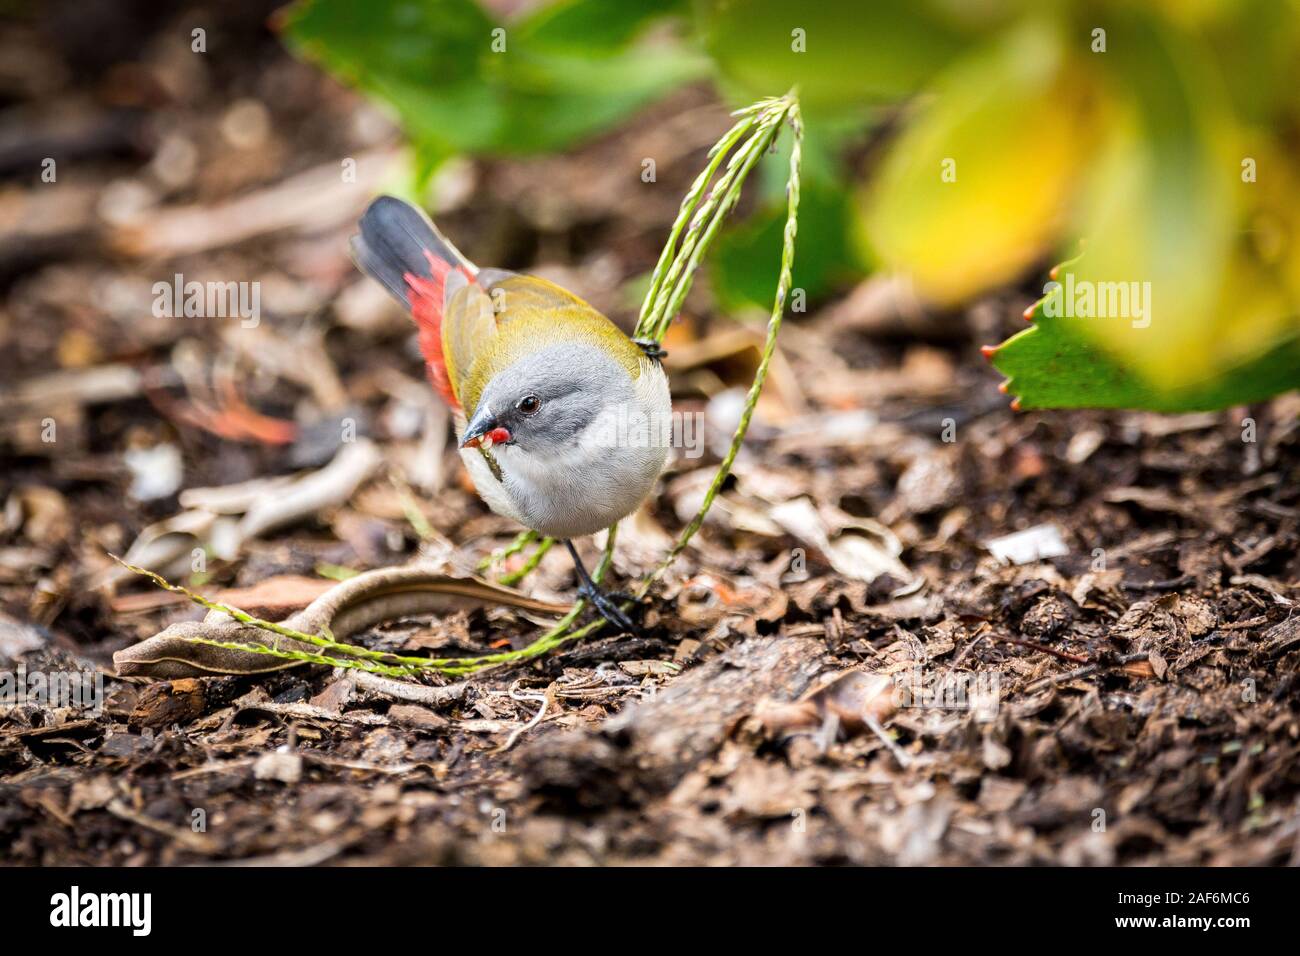 Close up of a swee waxbill (Coccopygia melanotis) sitting on a blade of grass near the ground, having seeds in its beak Stock Photo